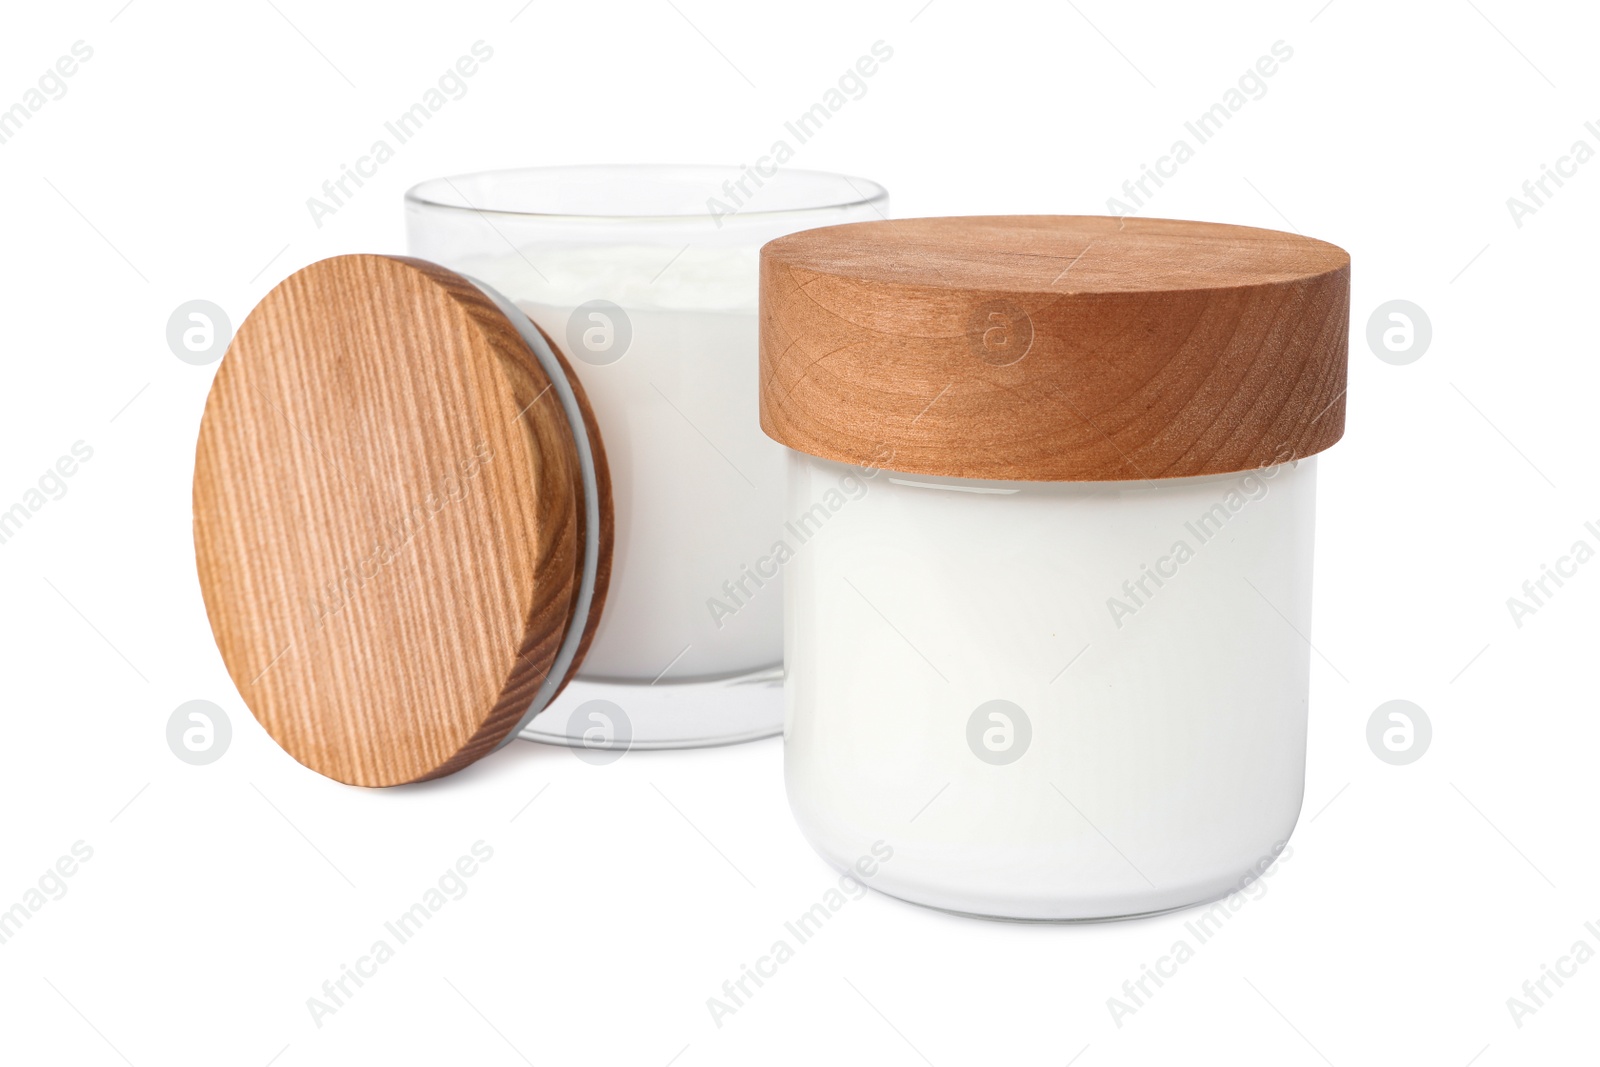 Photo of Jars of face cream isolated on white